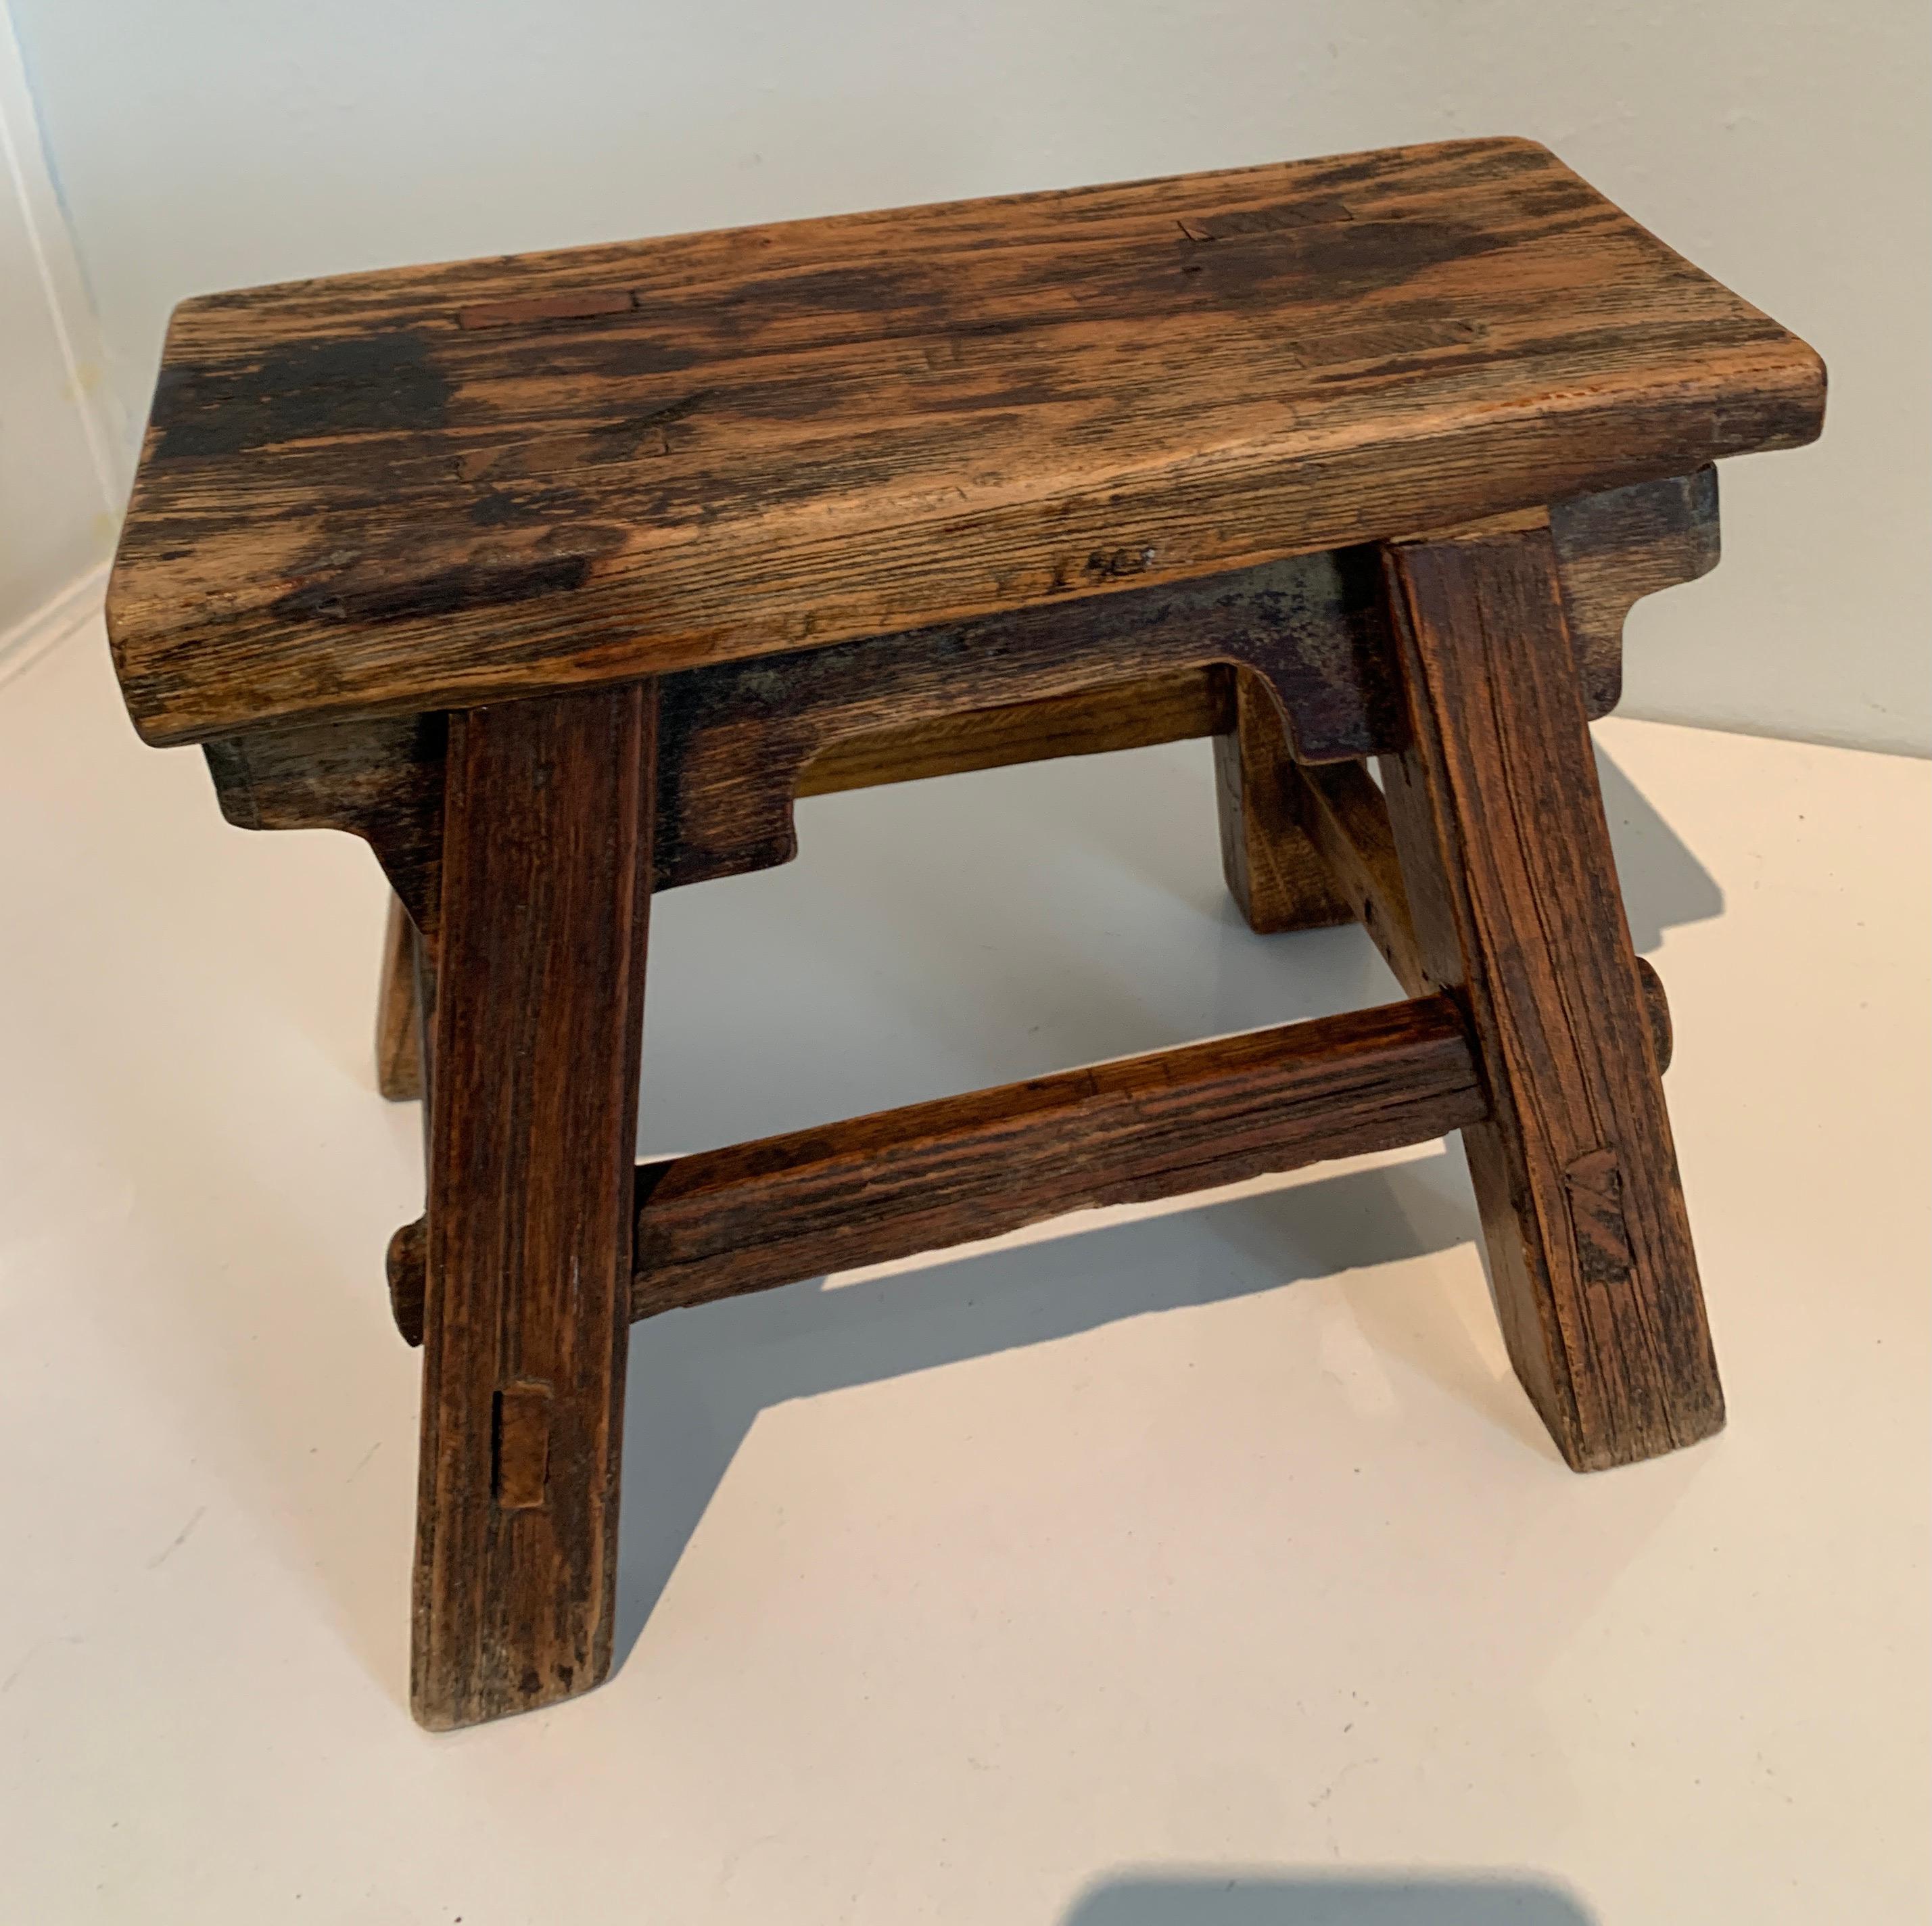 Hand-Crafted Hand Made Wooden Milk or Step Stool